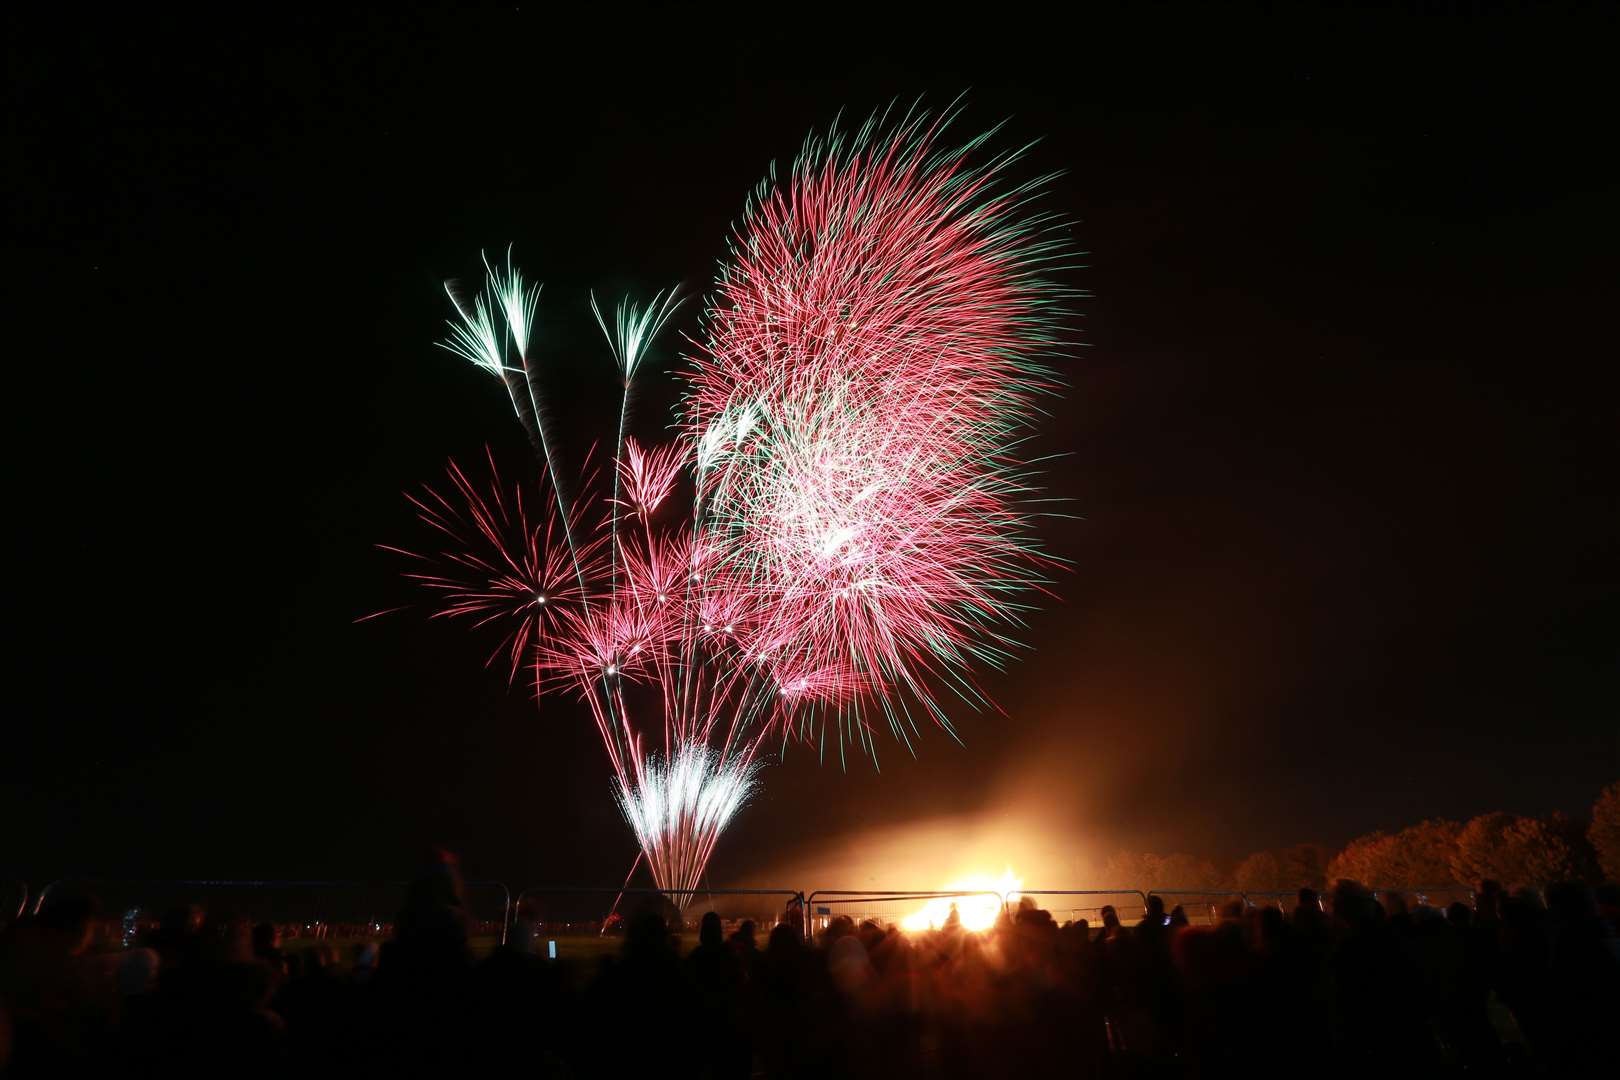 The fireworks display at the Great Lines in Gillingham in 2018. Picture: John Westhrop